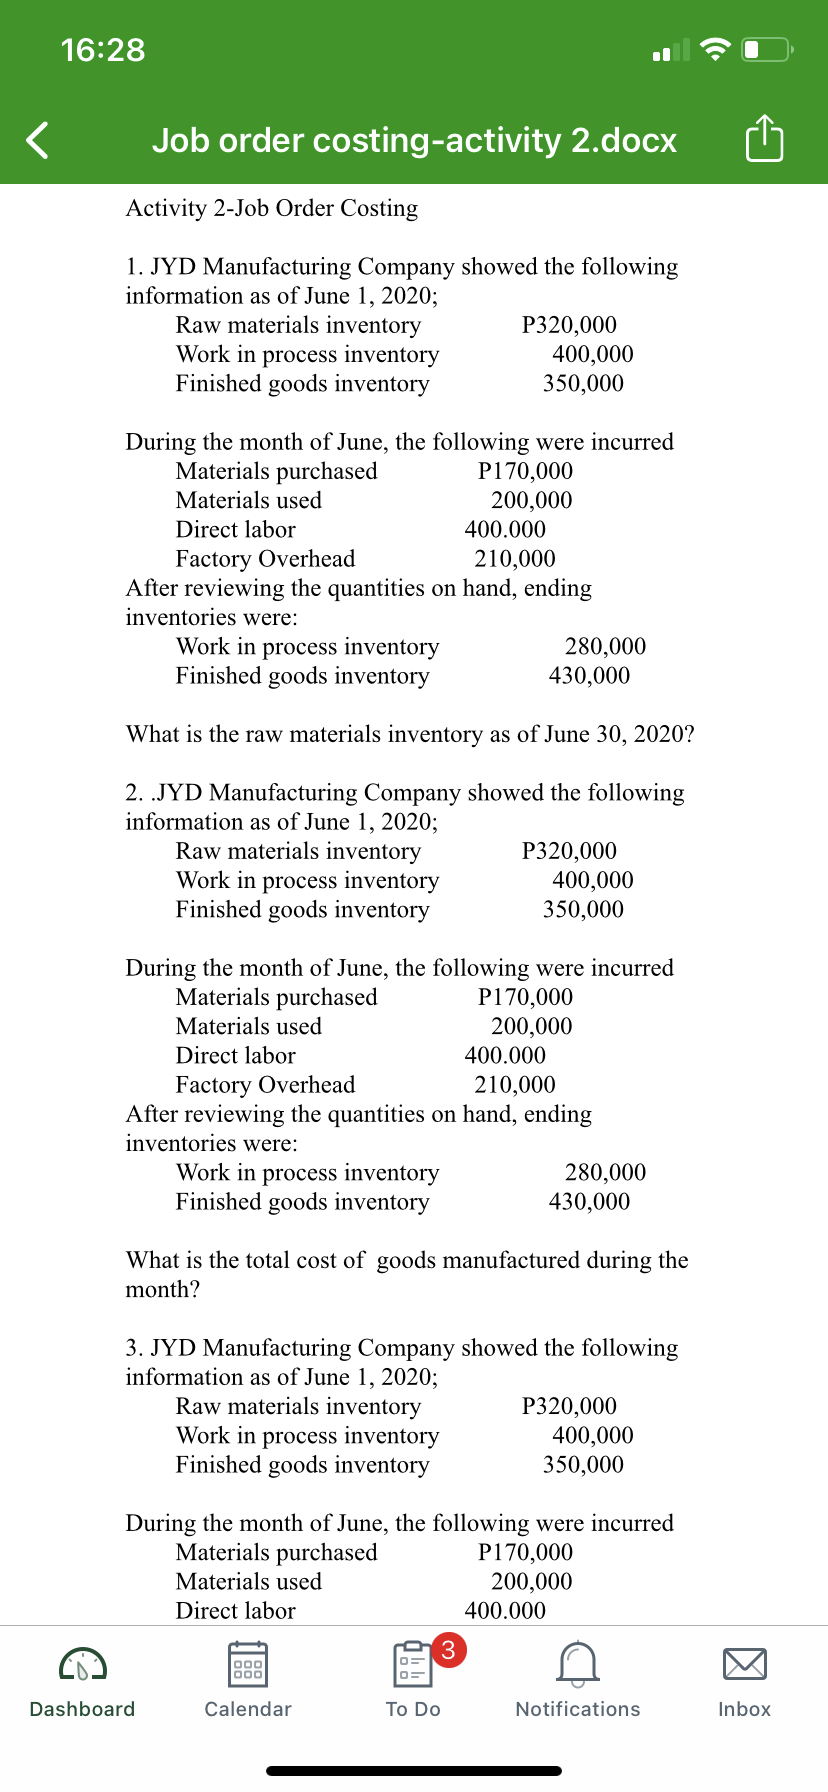 16:28
Job order costing-activity 2.docx
Activity 2-Job Order Costing
1. JYD Manufacturing Company showed the following
information as of June 1, 2020;
Raw materials inventory
Work in process inventory
Finished goods inventory
P320,000
400,000
350,000
During the month of June, the following were incurred
Materials purchased
P170,000
200,000
Materials used
Direct labor
400.000
Factory Overhead
After reviewing the quantities on hand, ending
inventories were:
Work in process inventory
Finished goods inventory
210,000
280,000
430,000
What is the raw materials inventory as of June 30, 2020?
2. .JYD Manufacturing Company showed the following
information as of June 1, 2020;
Raw materials inventory
Work in process inventory
Finished goods inventory
P320,000
400,000
350,000
During the month of June, the following were incurred
Materials purchased
P170,000
200,000
400.000
Materials used
Direct labor
Factory Overhead
After reviewing the quantities on hand, ending
inventories were:
210,000
Work in process inventory
Finished goods inventory
280,000
430,000
What is the total cost of goods manufactured during the
month?
3. JYD Manufacturing Company showed the following
information as of June 1, 2020;
Raw materials inventory
Work in process inventory
Finished goods inventory
Р20,000
400,000
350,000
During the month of June, the following were incurred
Materials purchased
P170,000
200,000
Materials used
Direct labor
400.000
3
000
Dashboard
Calendar
To Do
Notifications
Inbox
